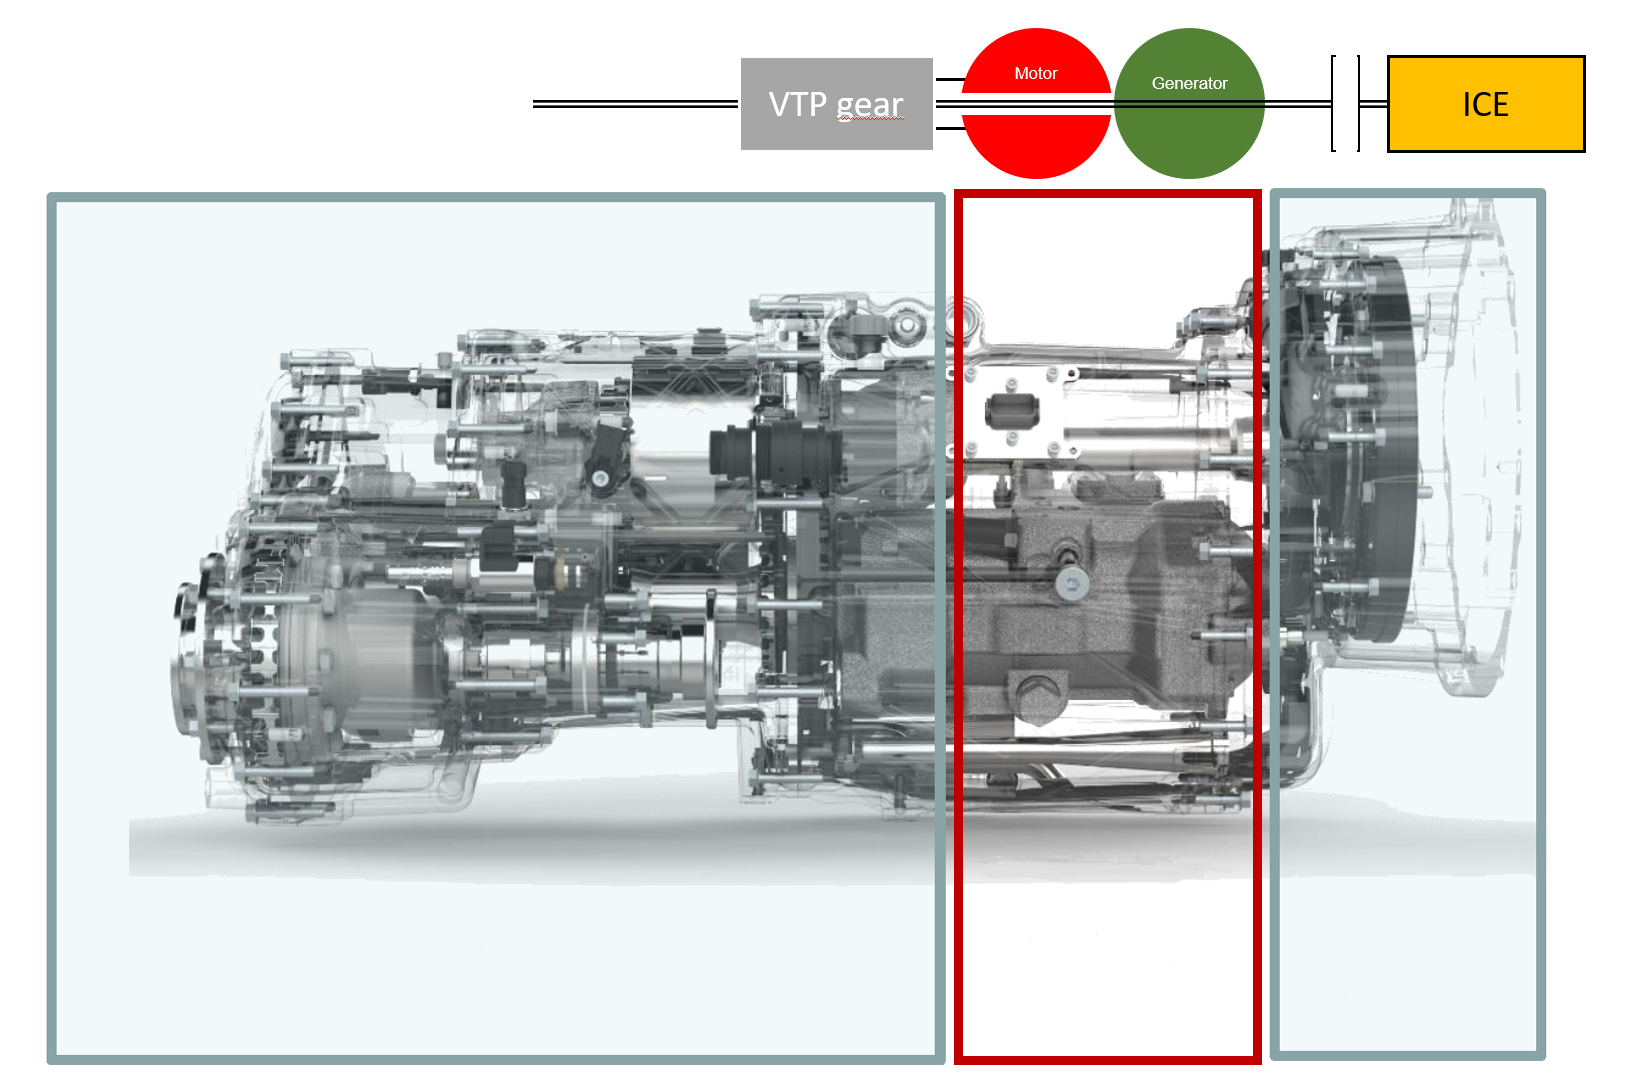 schematic illustration of the planned design of the eCVT transmission